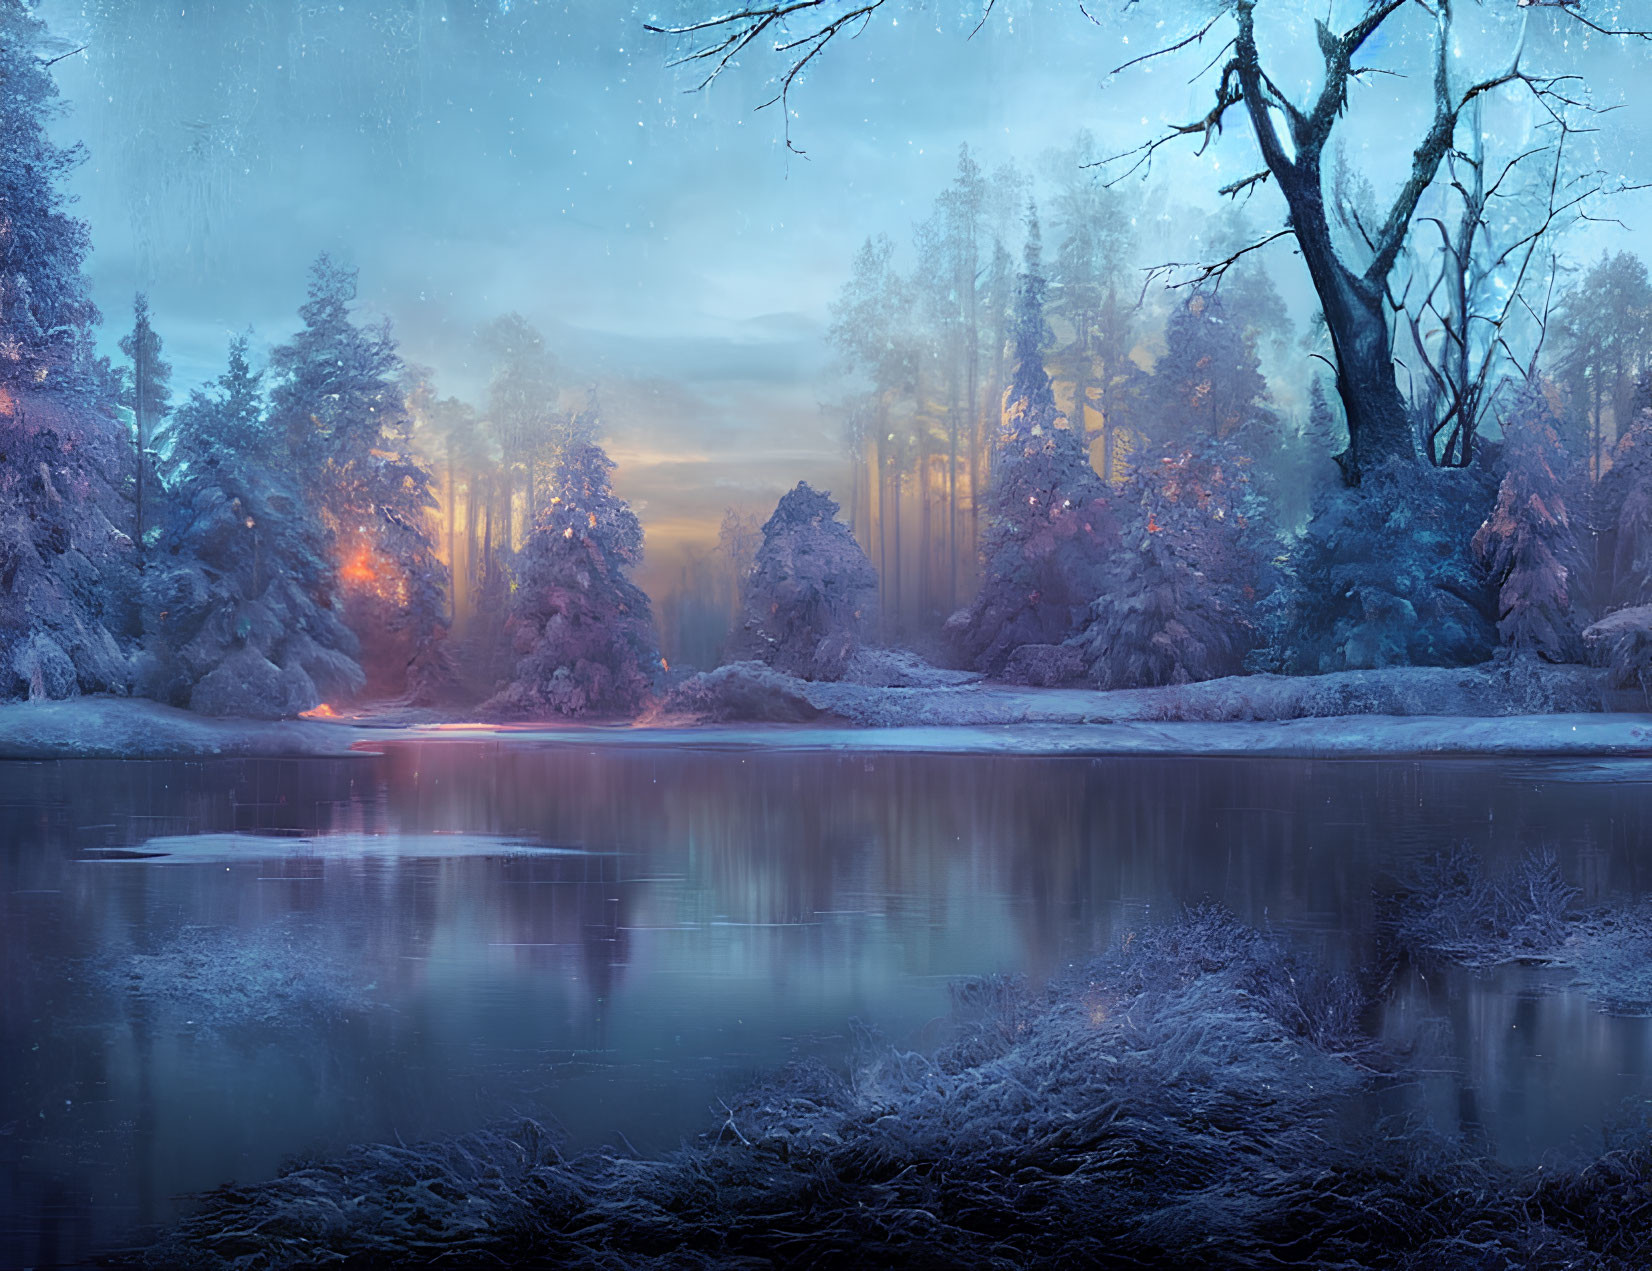 Snow-covered twilight forest scene with pink sunset reflection on serene lake